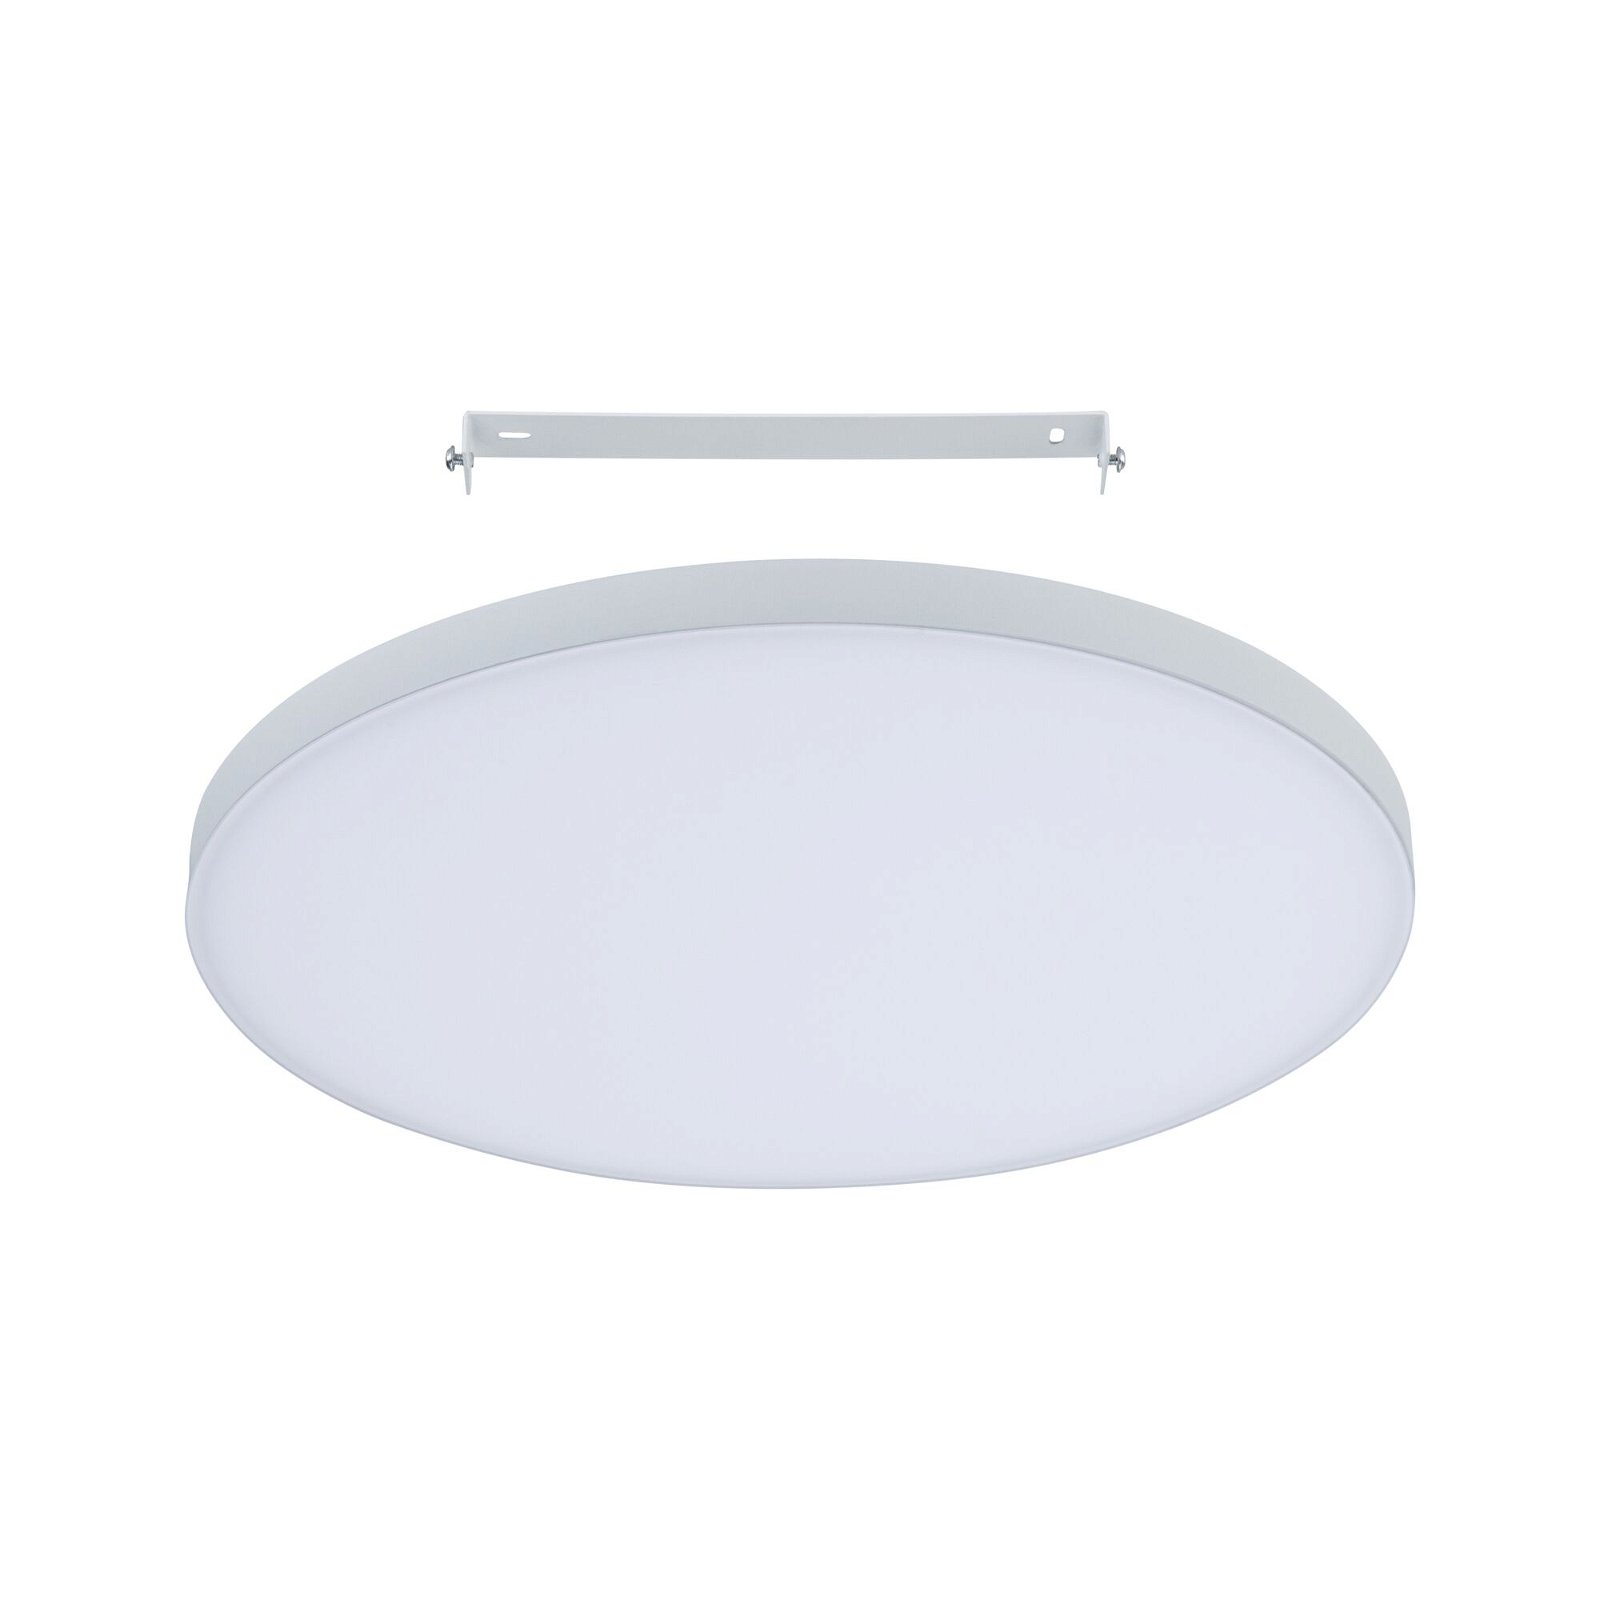 LED-paneel Velora rond 400mm White Switch Wit